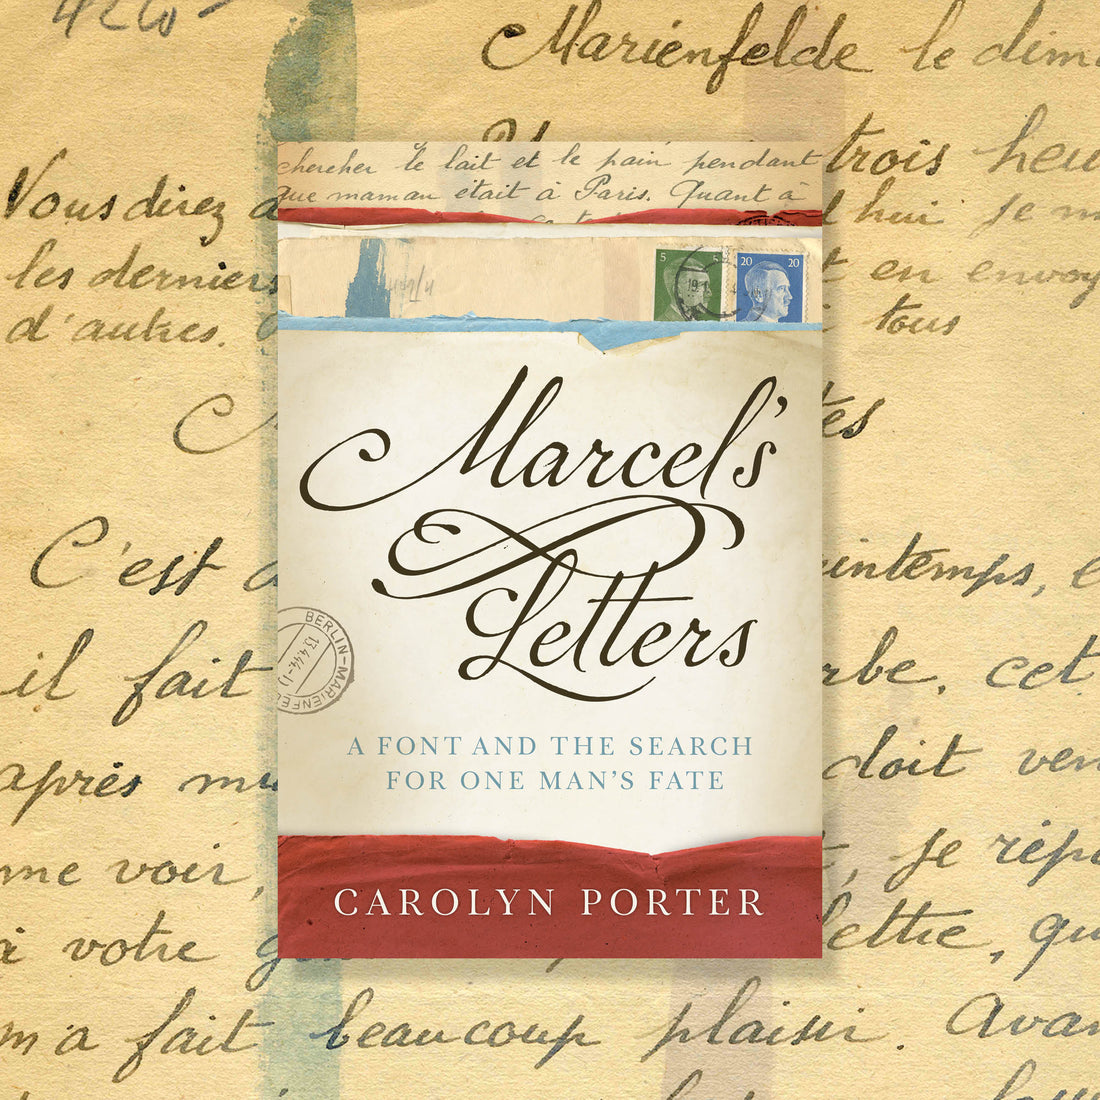 A Book Signing by Carolyn Porter